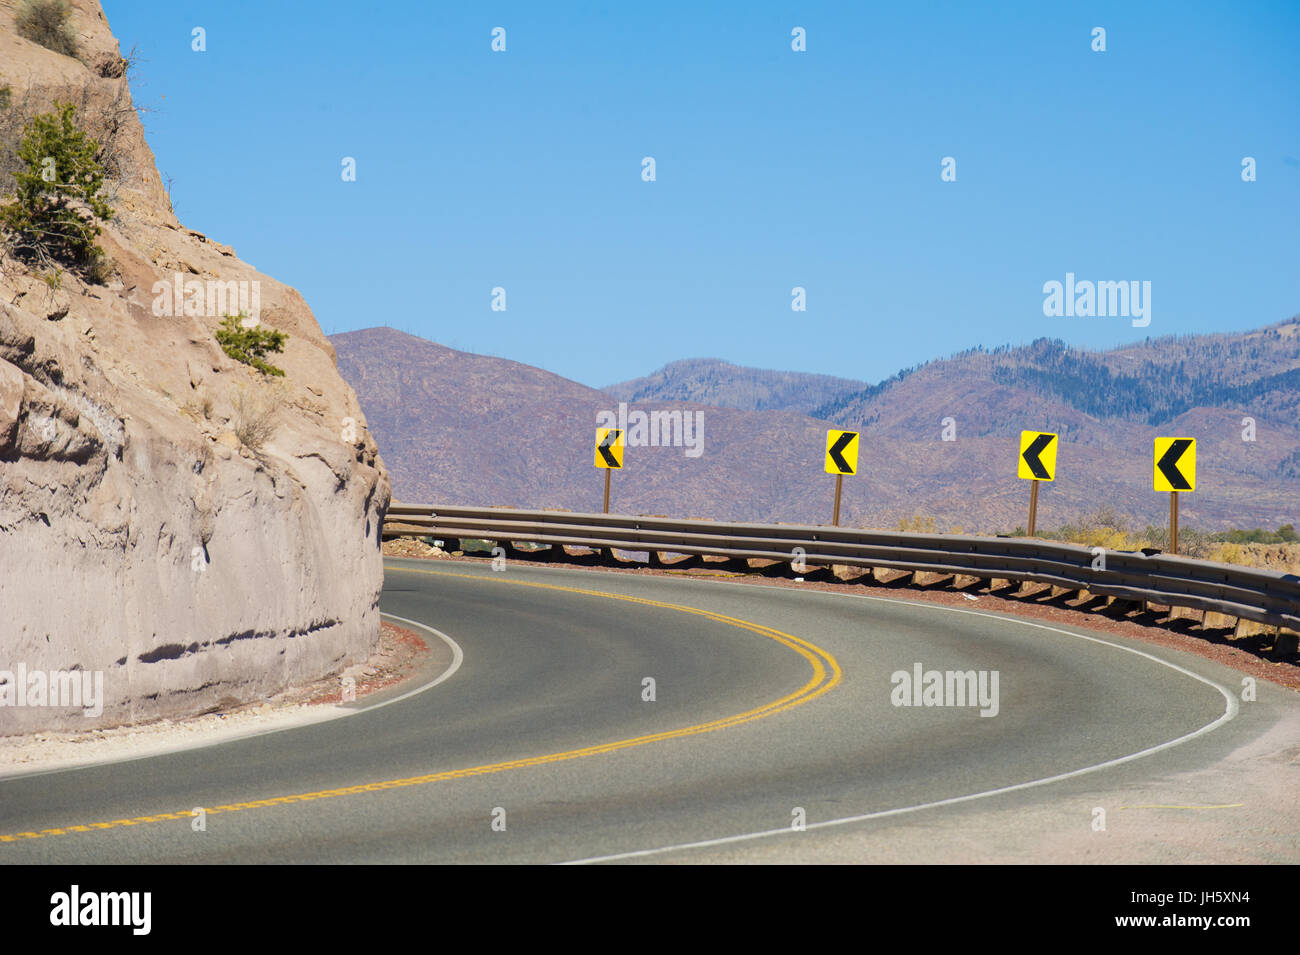 highway-curve-in-the-mountain-turning-left-on-the-way-to-los-alamos-JH5XN4.jpg